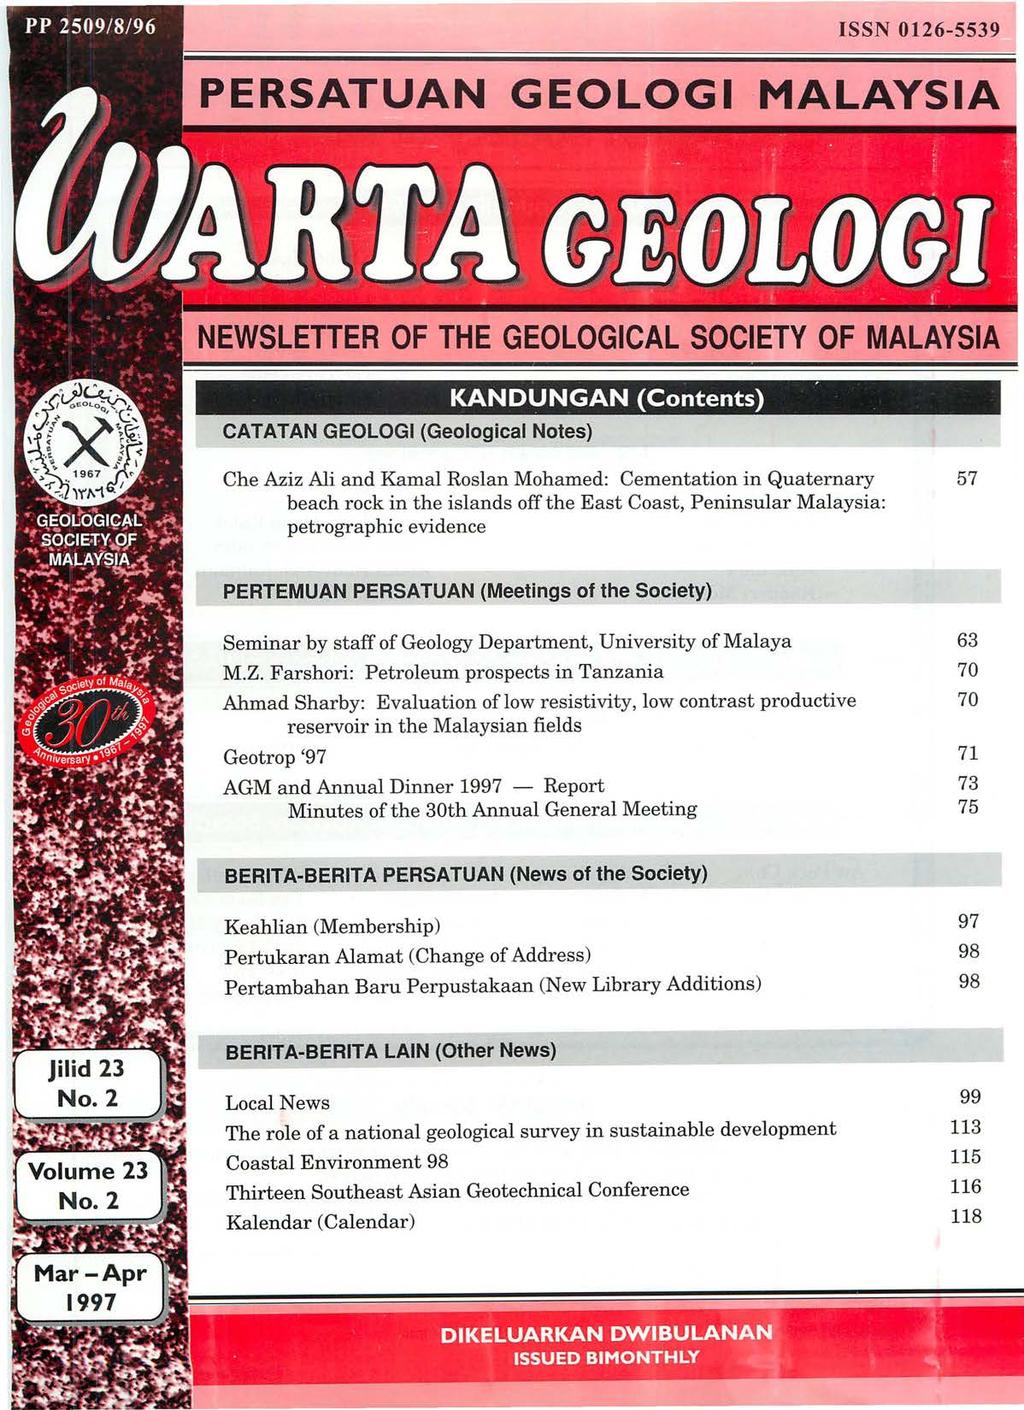 ISSN 0126-5539 PERSATUAN GEOLOGI MALAYSIA NEWSLETTER OF THE GEOLOGICAL SOCIETY OF MALAYSIA KANDUNGAN (Contents), CATATAN GEOLOGI (Geological Notes) Che Aziz Ali and Kamal Roslan Mohamed: Cementation